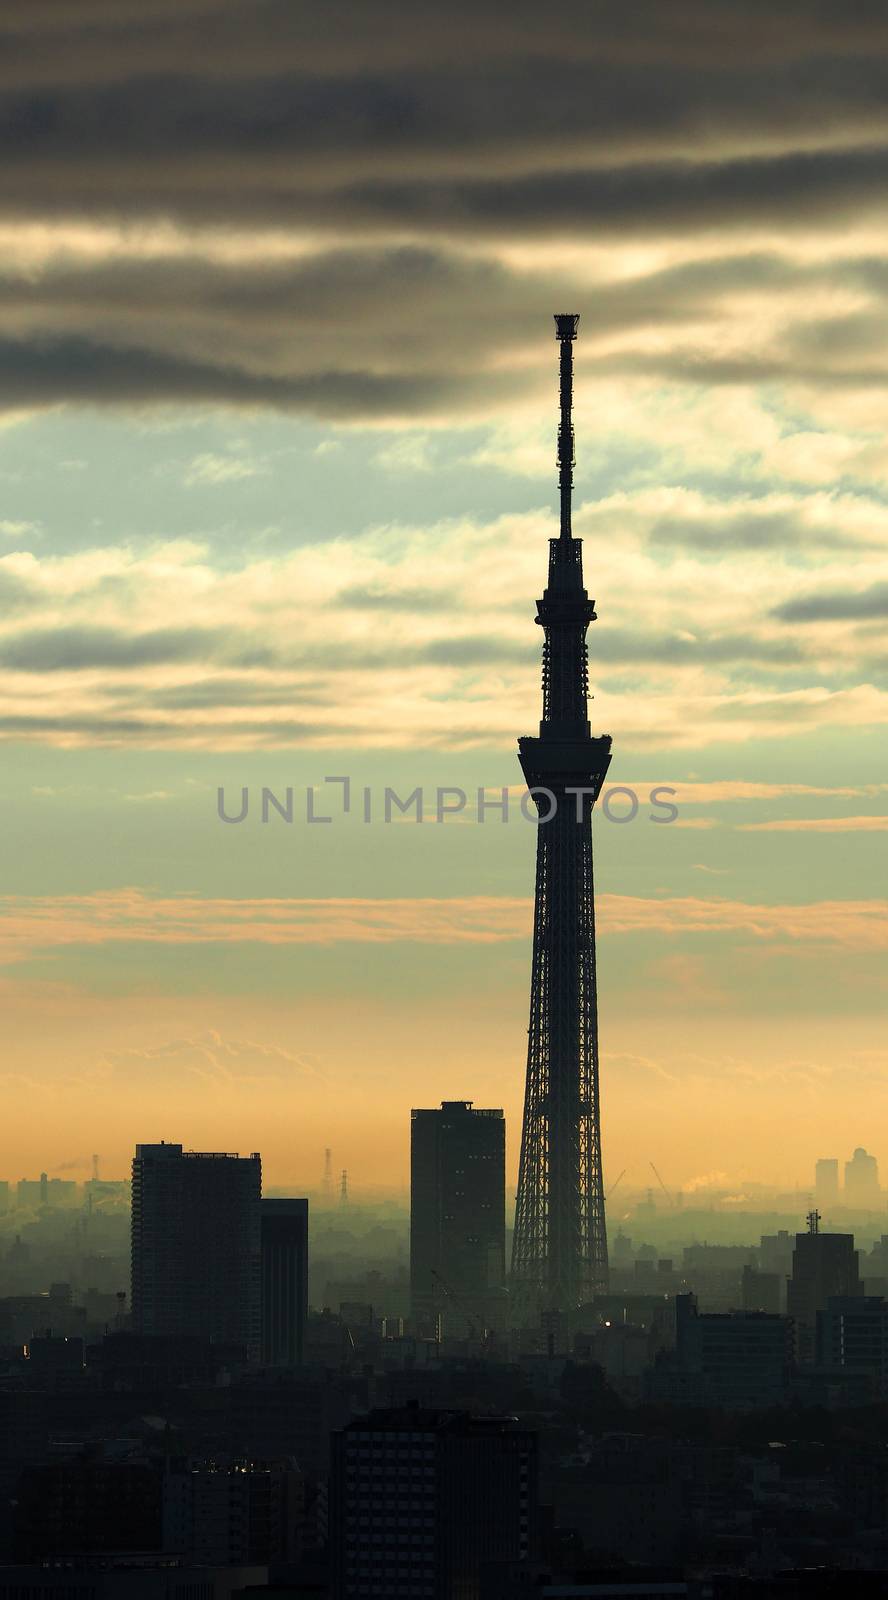 Tokyo Sky tree silhouette building and sunset with sky and clouds.